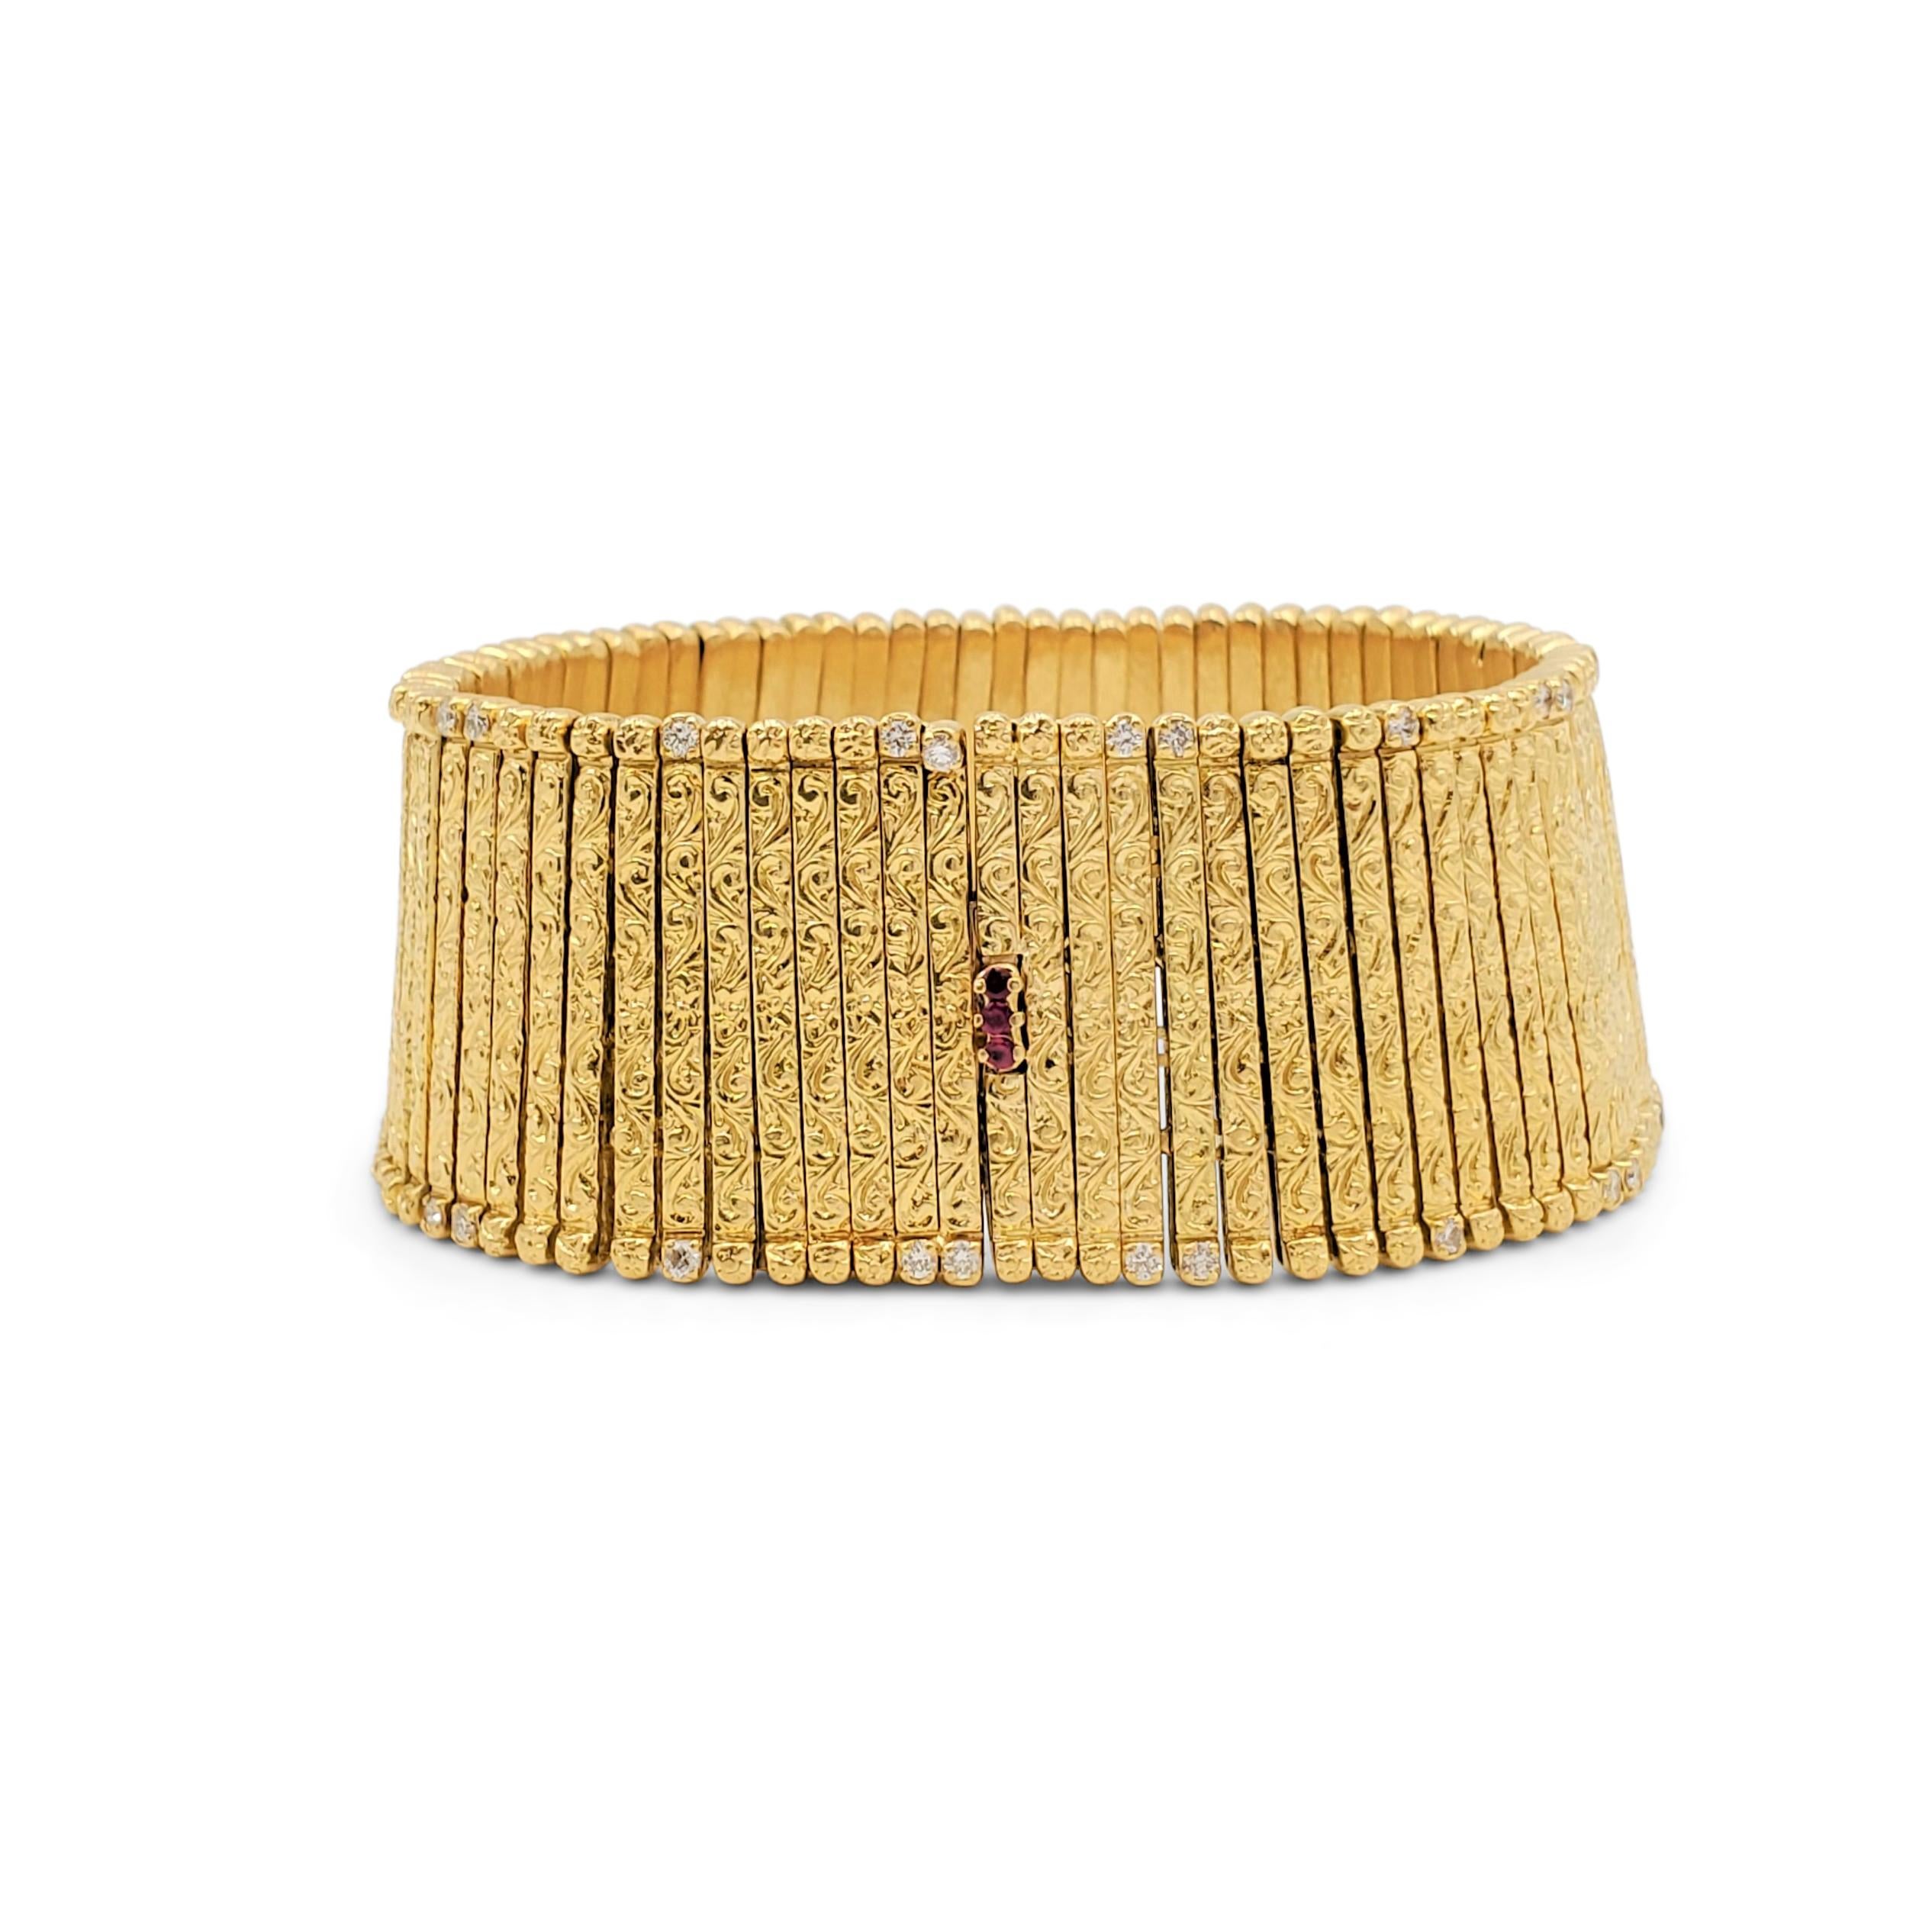 Authentic Roberto Coin flexible bracelet crafted in 18 karat yellow gold is comprised of floral engraved links highlighted by a smattering of sparkling round brilliant cut diamonds weighing an estimated 0.45 carats total weight. Three ruby stones